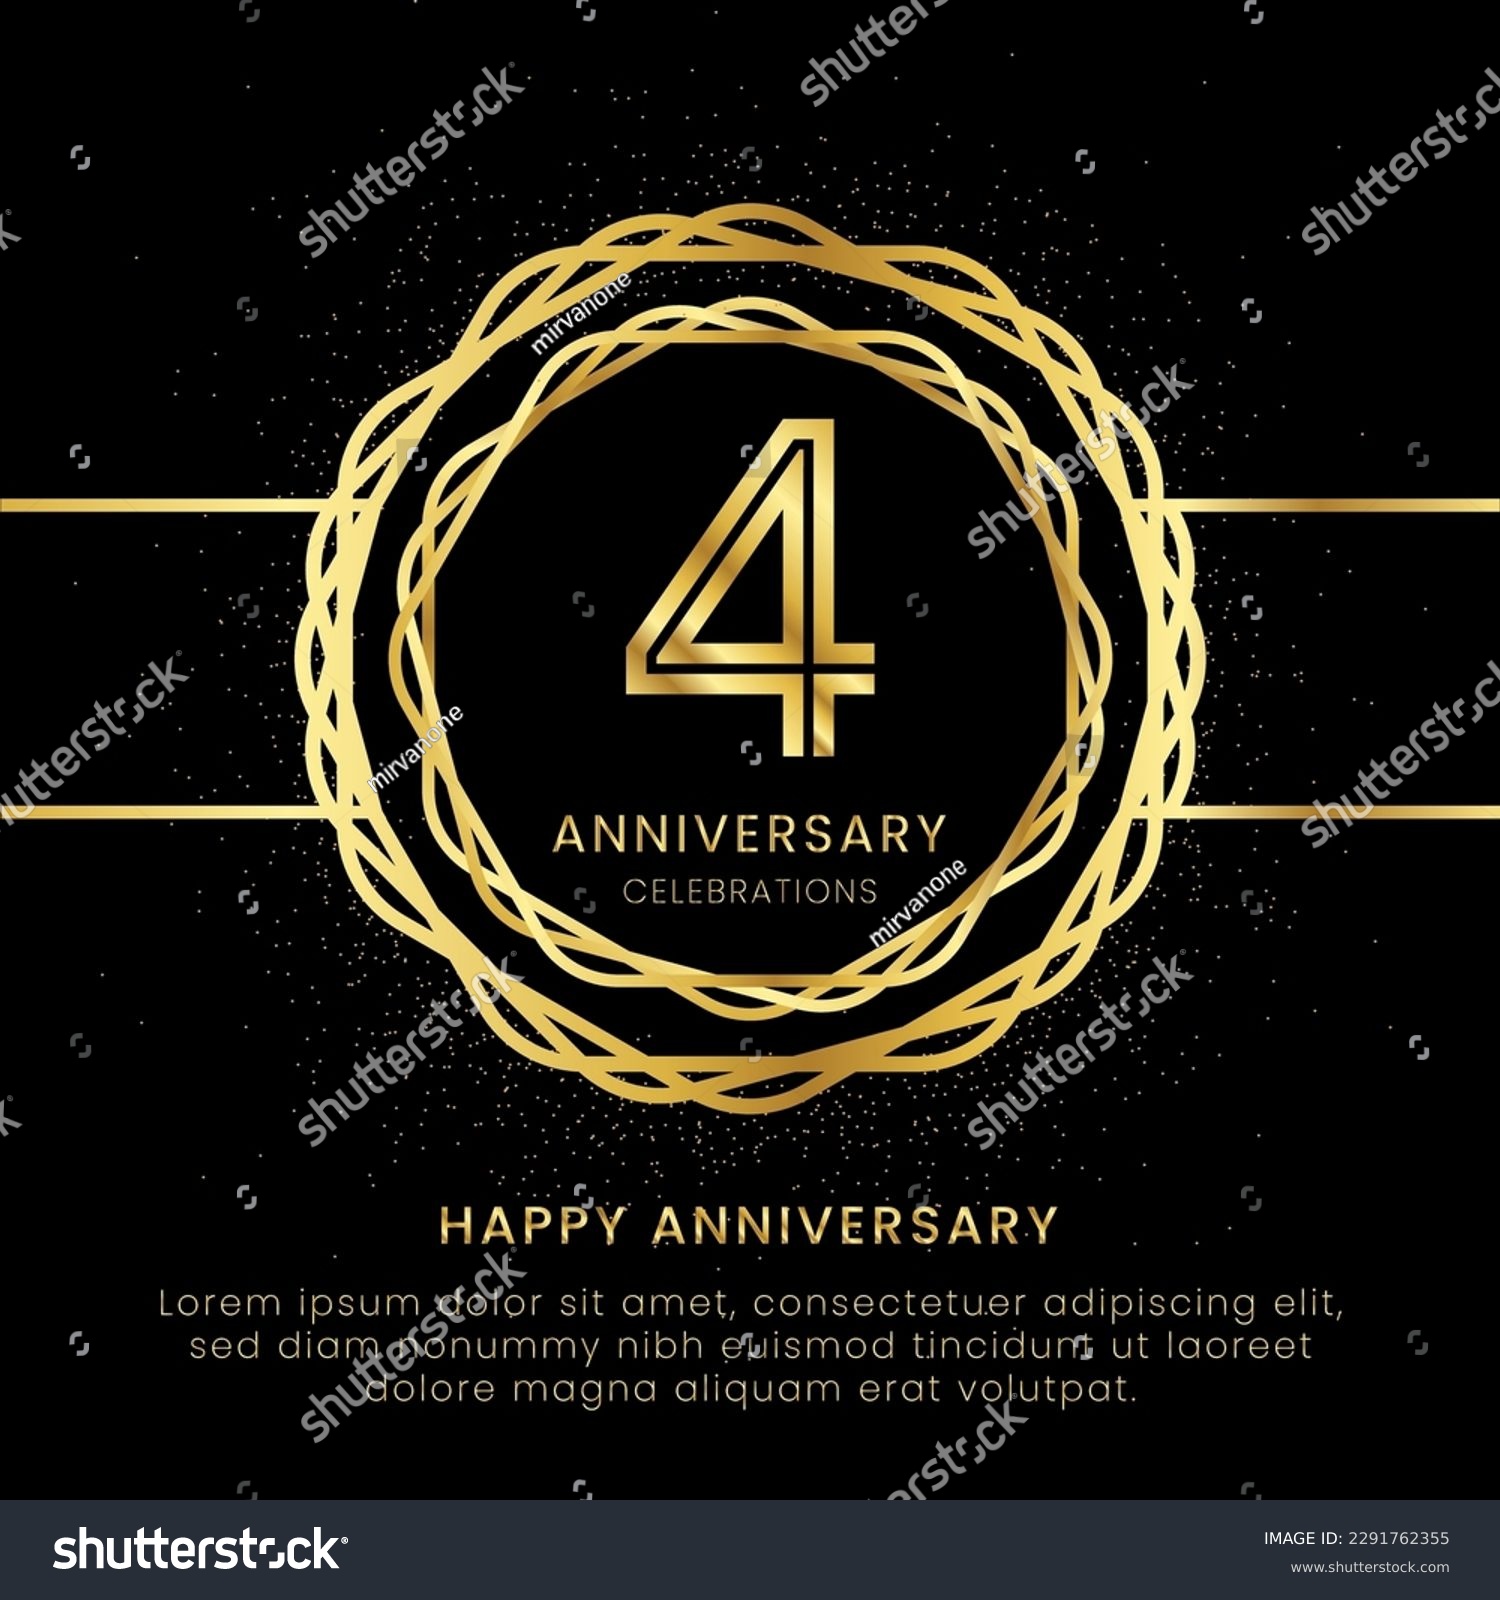 SVG of 4 years anniversary with a golden number, golden glitters, and a golden circle rope on a black background. Circle a gold hexagon with glitter. svg